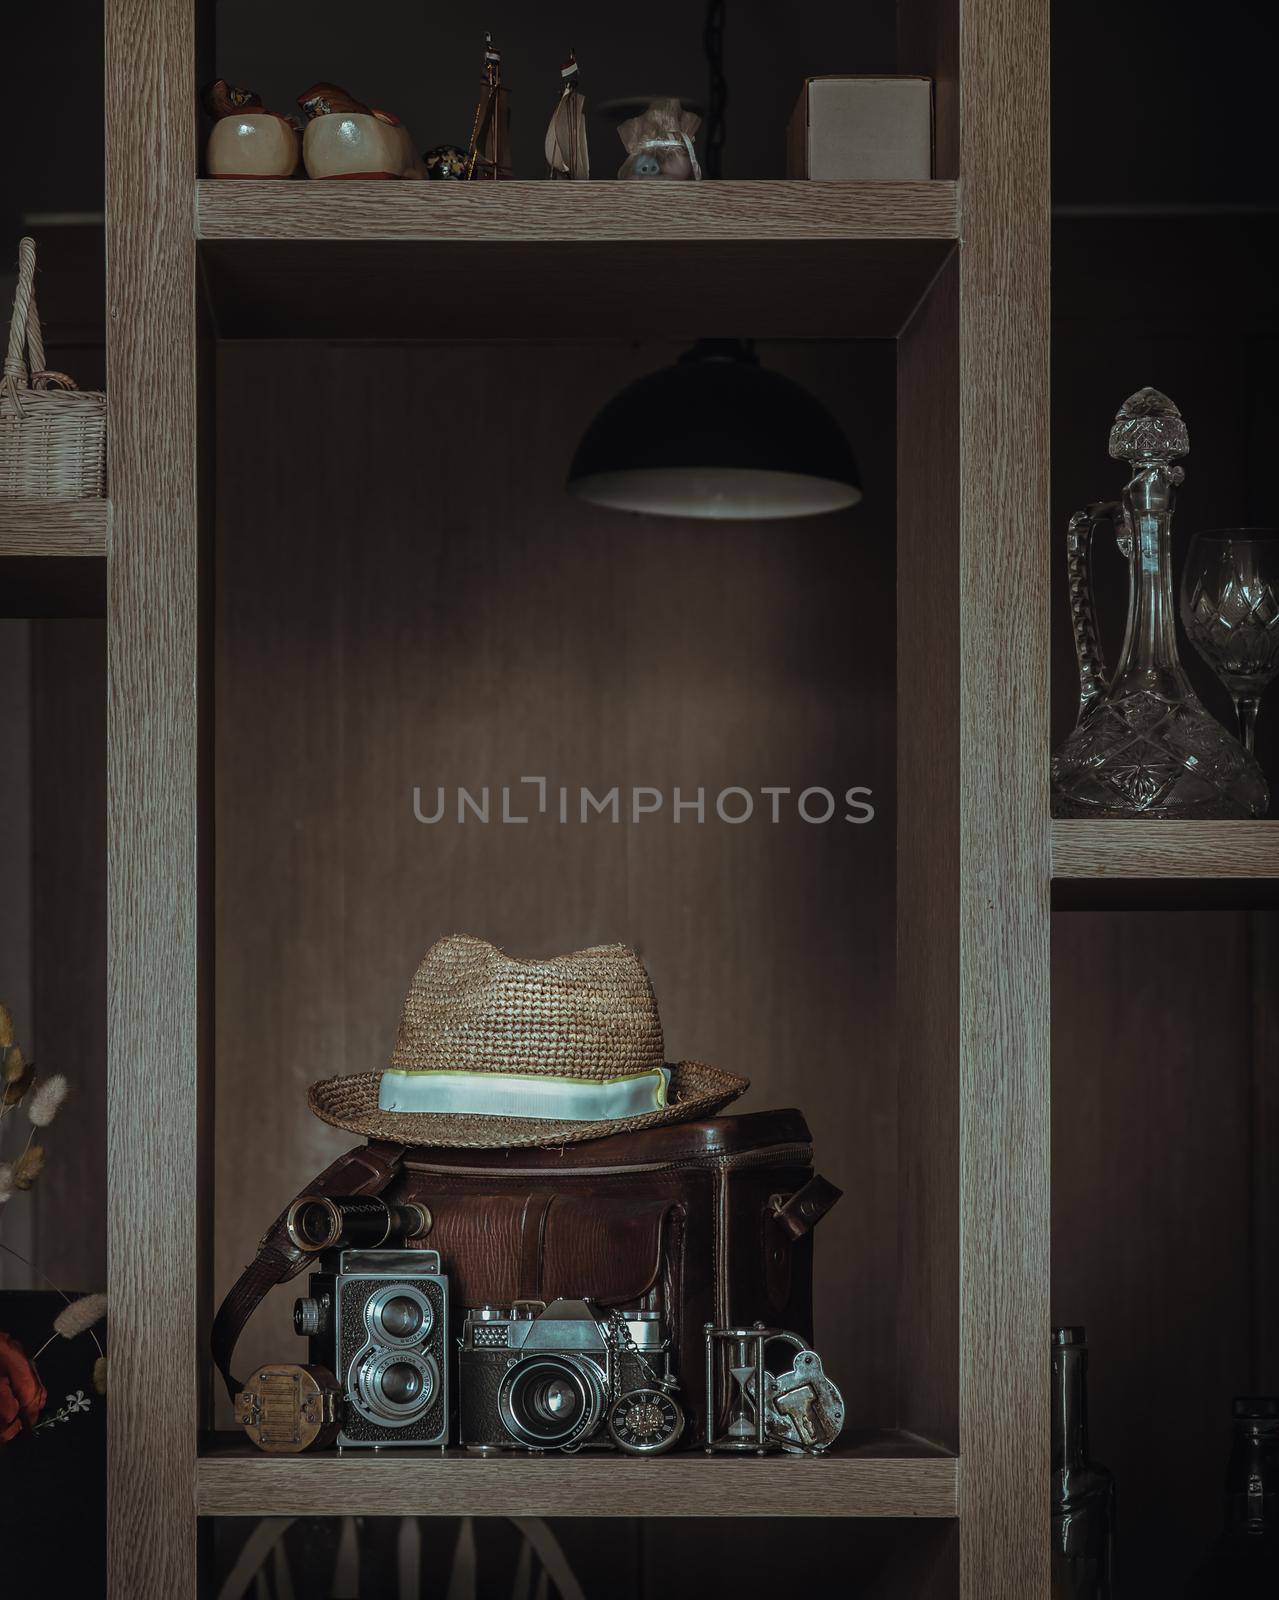 Wooden shelves displaying vintage style collectibles have Hourglass, Retro pocket watch, Binocular, Compass, iron padlock, Photo camera and Straw fedora hat on Leather bag in the living room. Interior style concept. No focus, specifically.